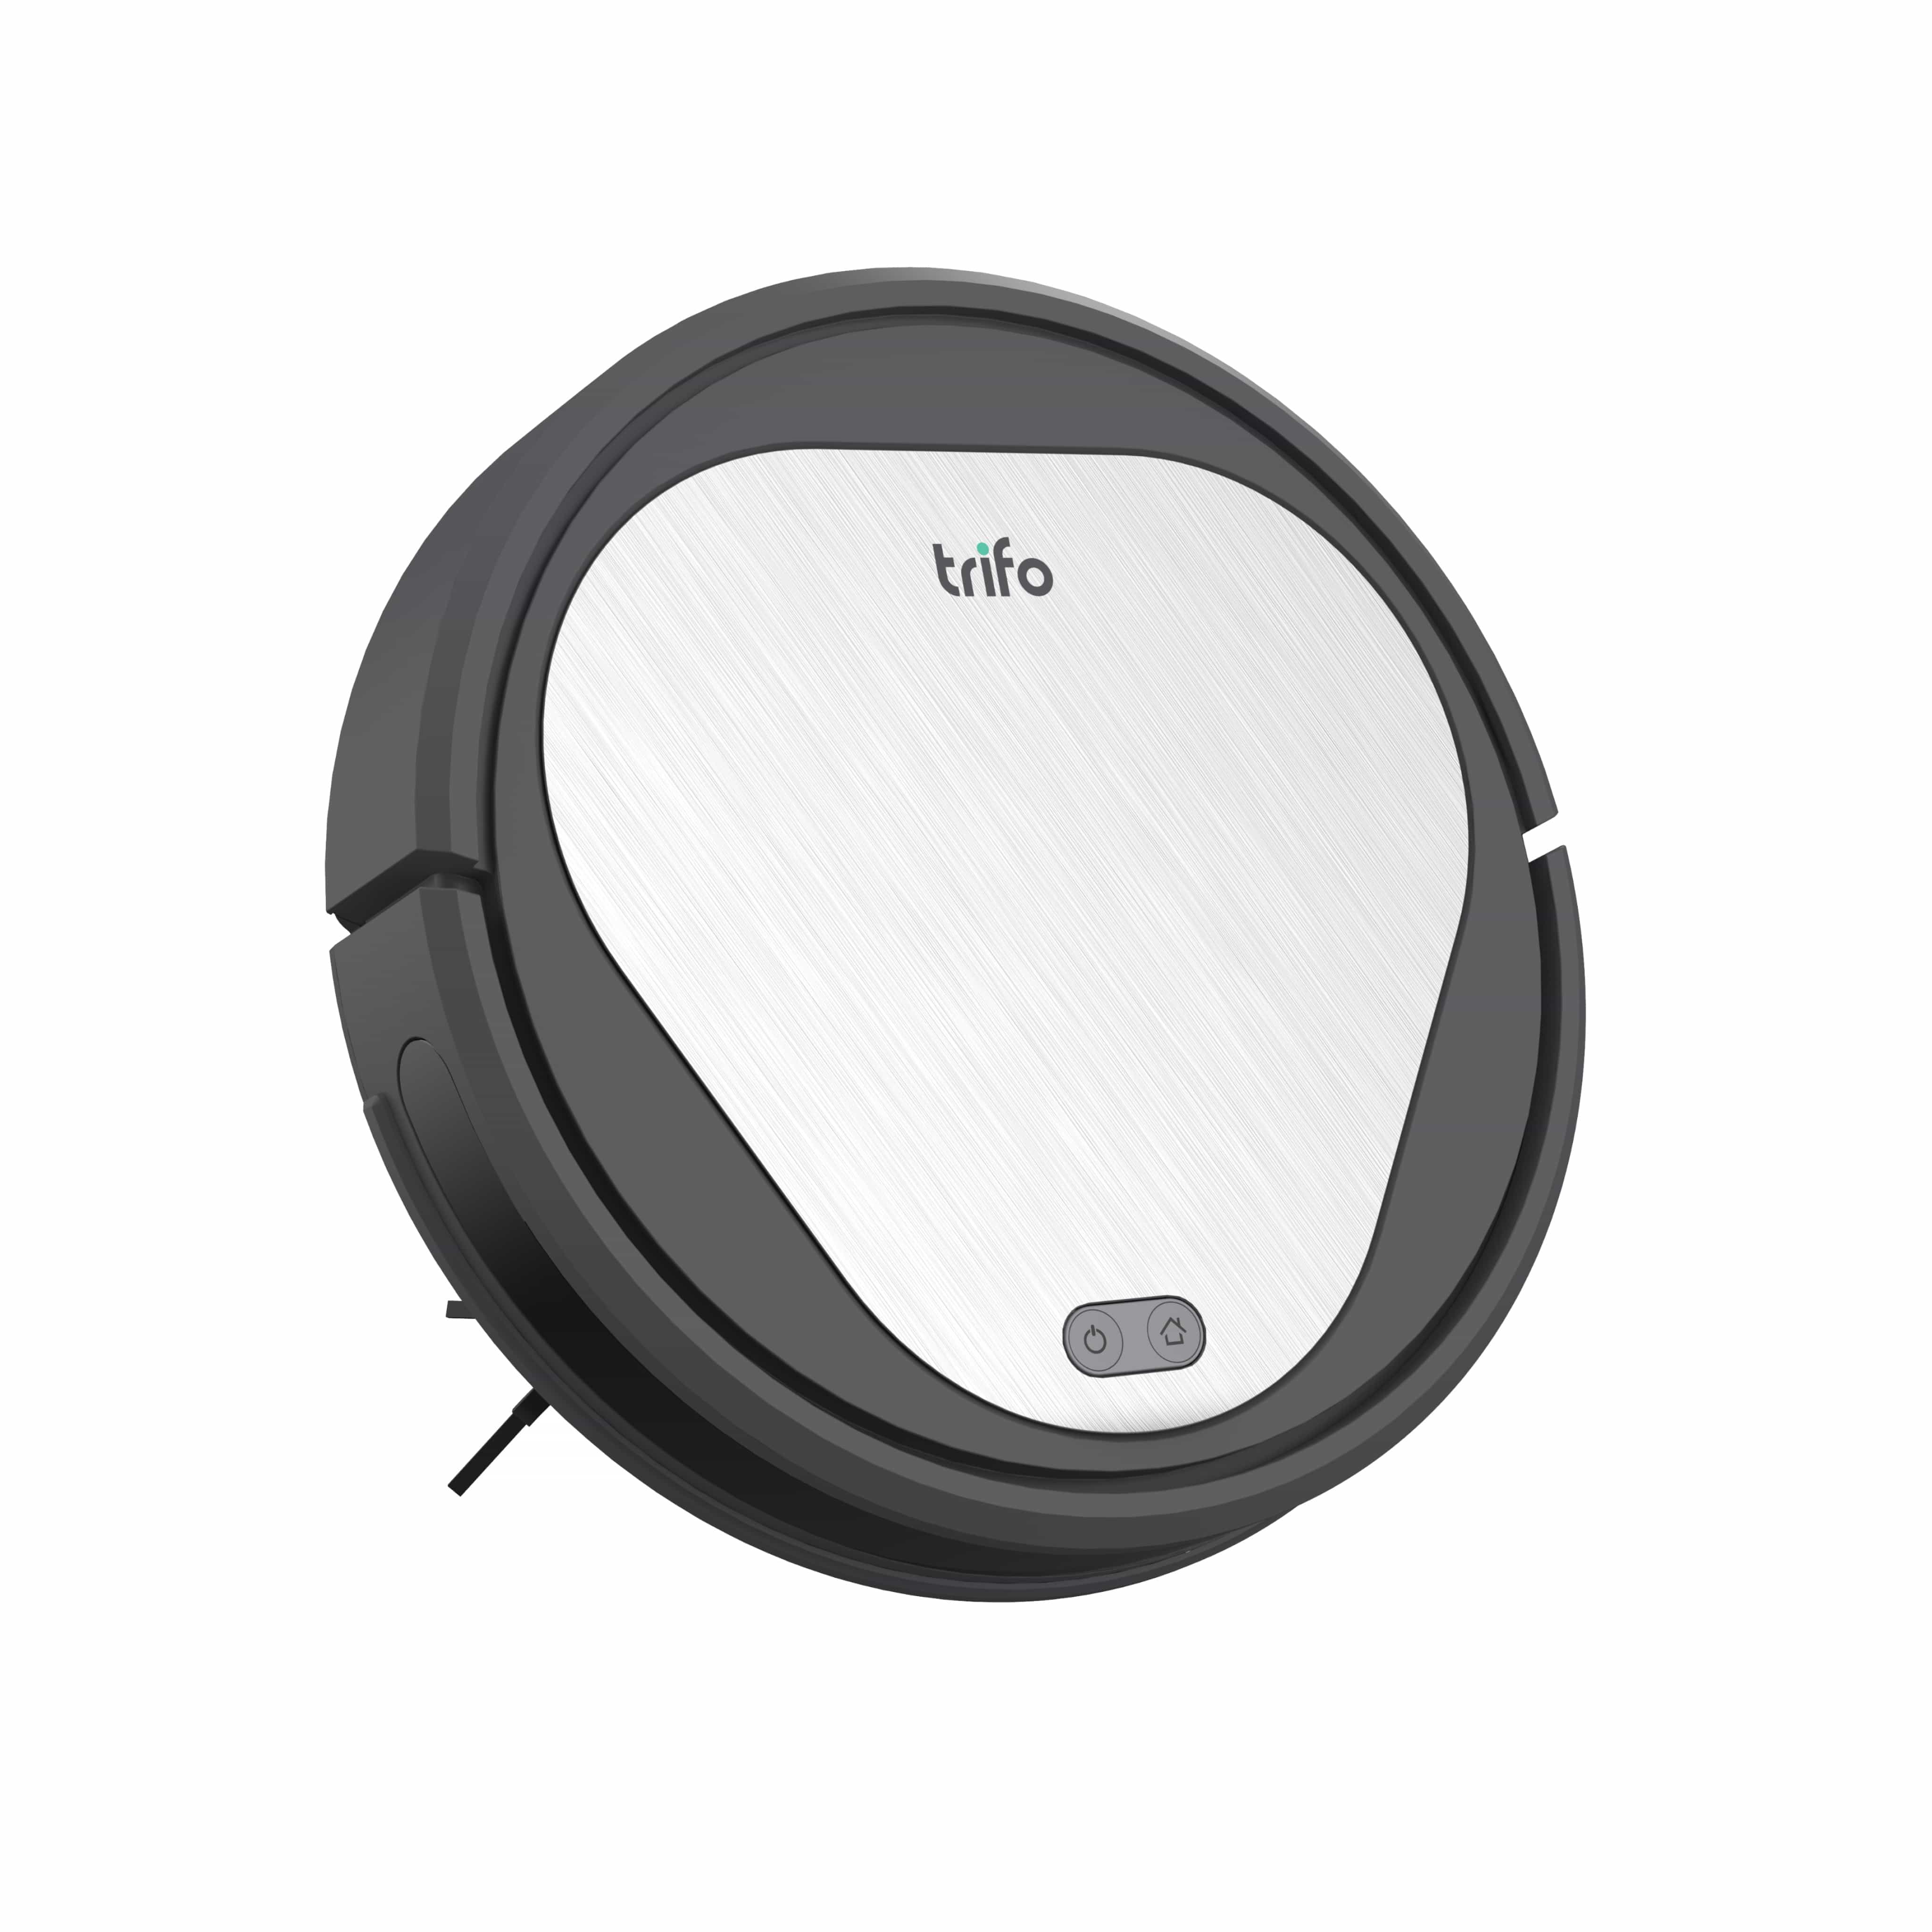 Emma Pet - Trifo Robot Vacuum Cleaner for Pet Owners, Powerful Suction